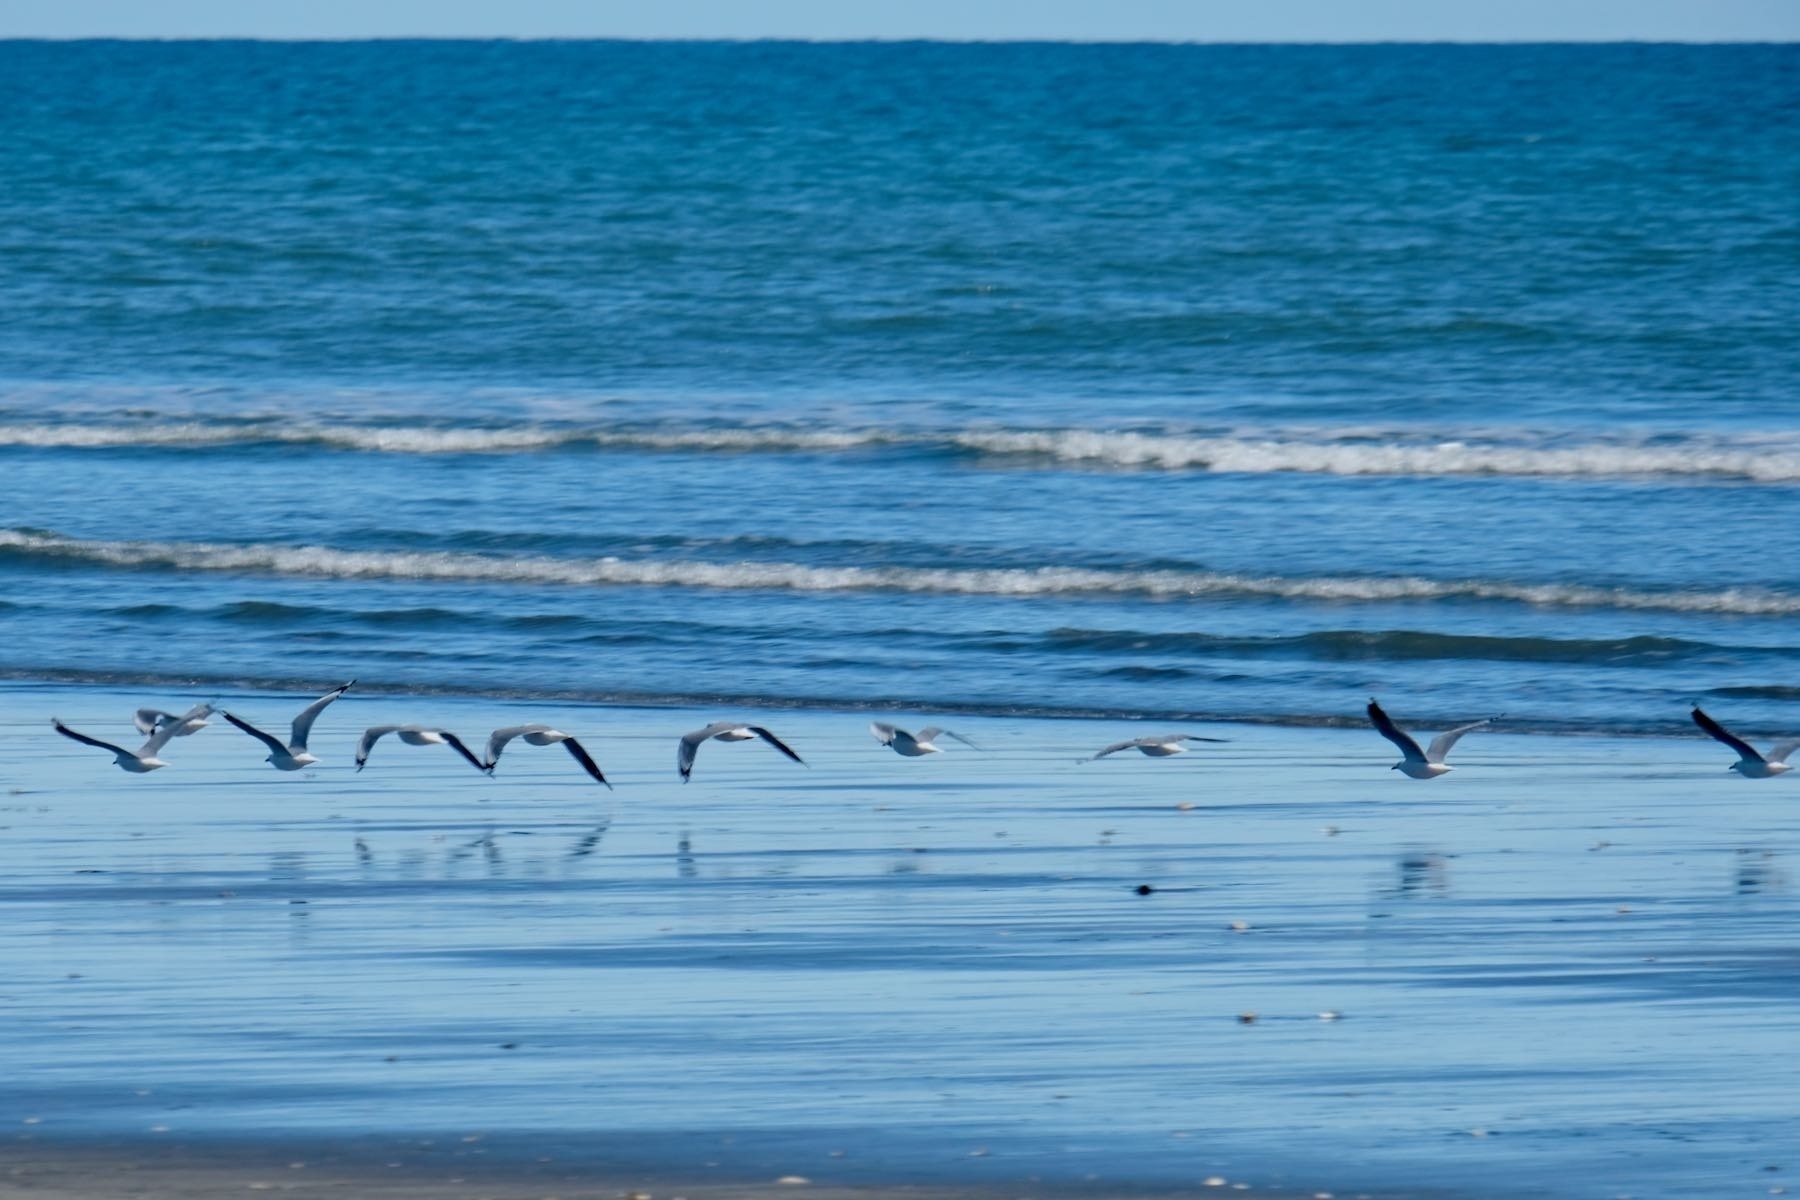 A line of about 12 gulls flying low over wet sand. 